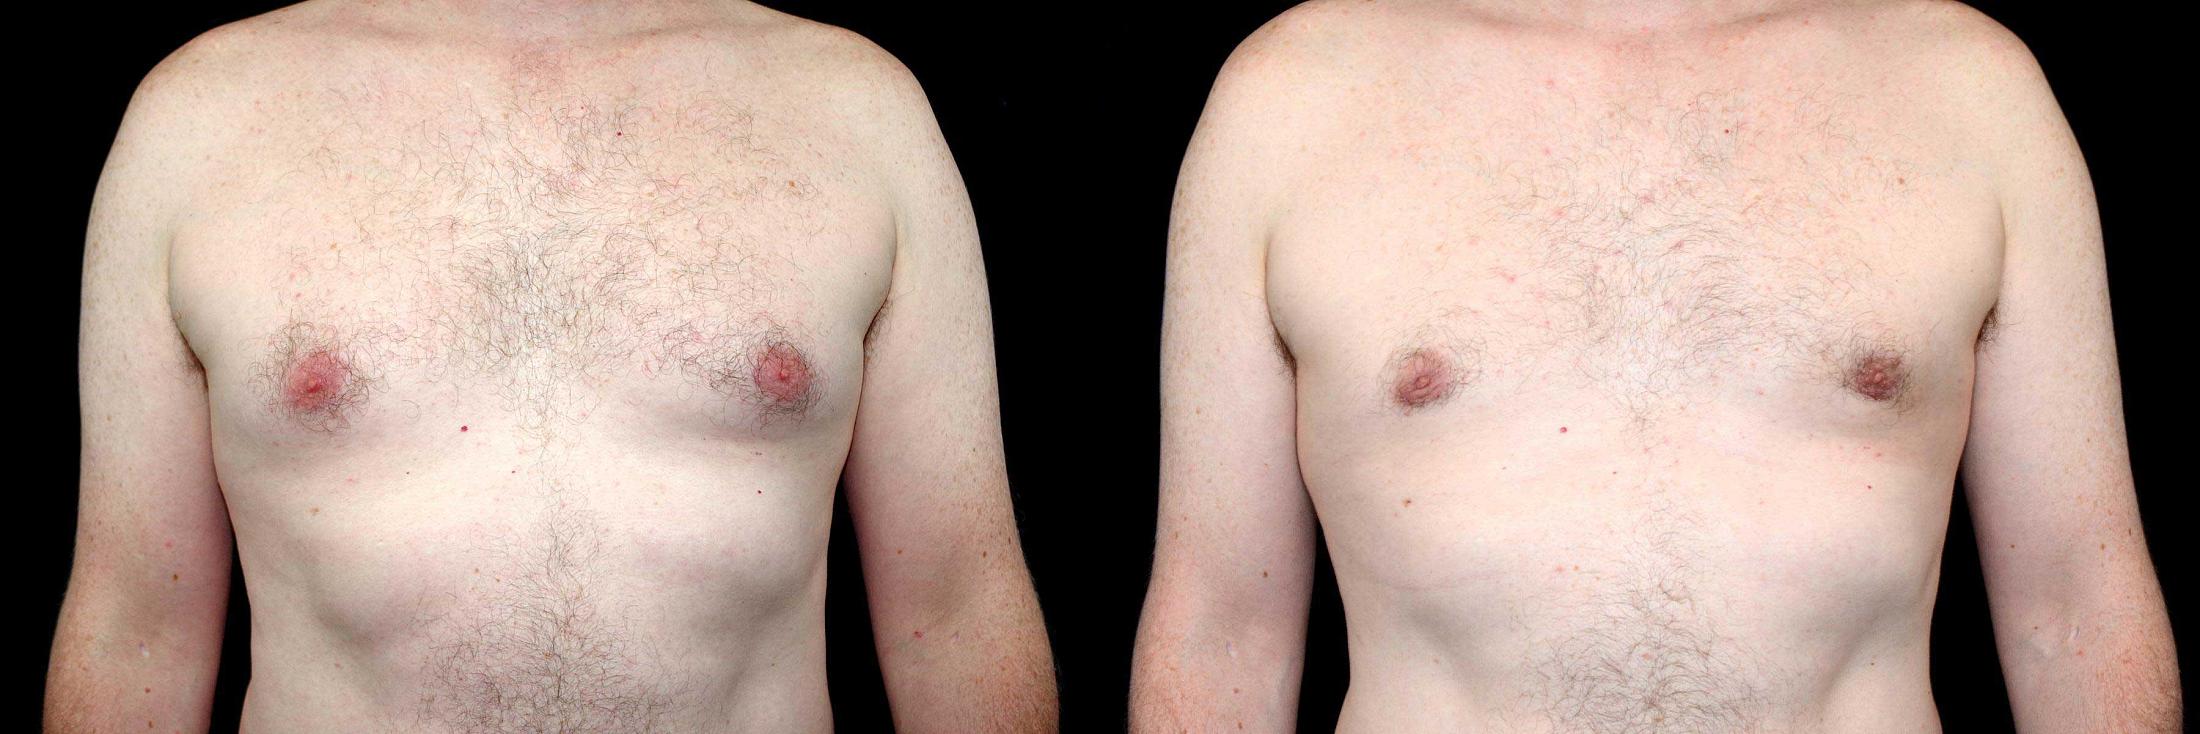 before and after gynecomastia surgery